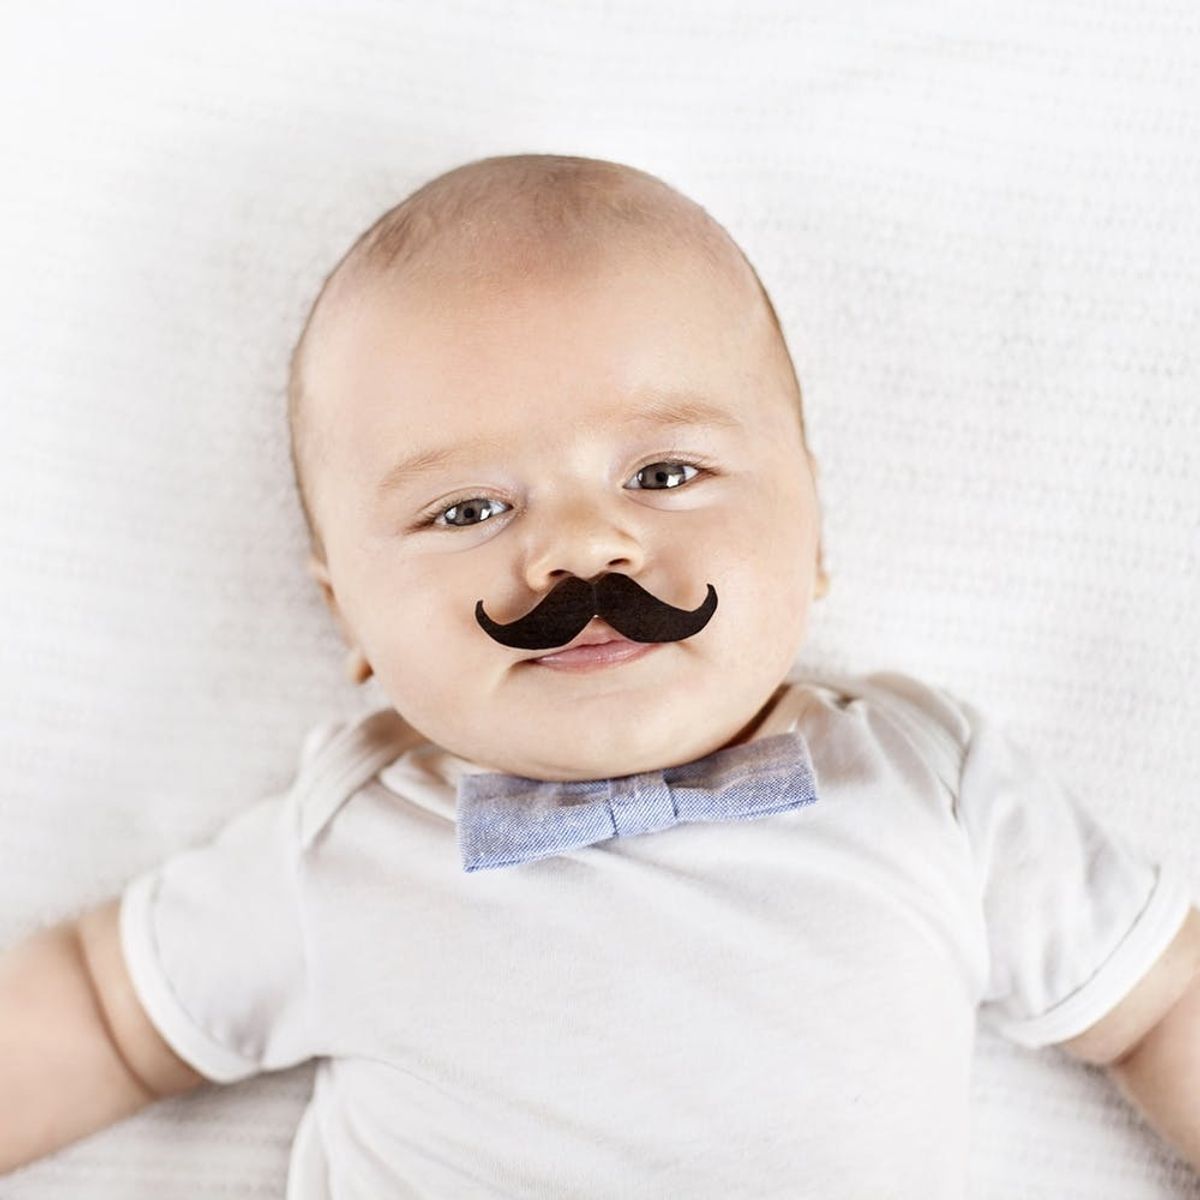 These Are the Weirdest Popular Baby Names by State